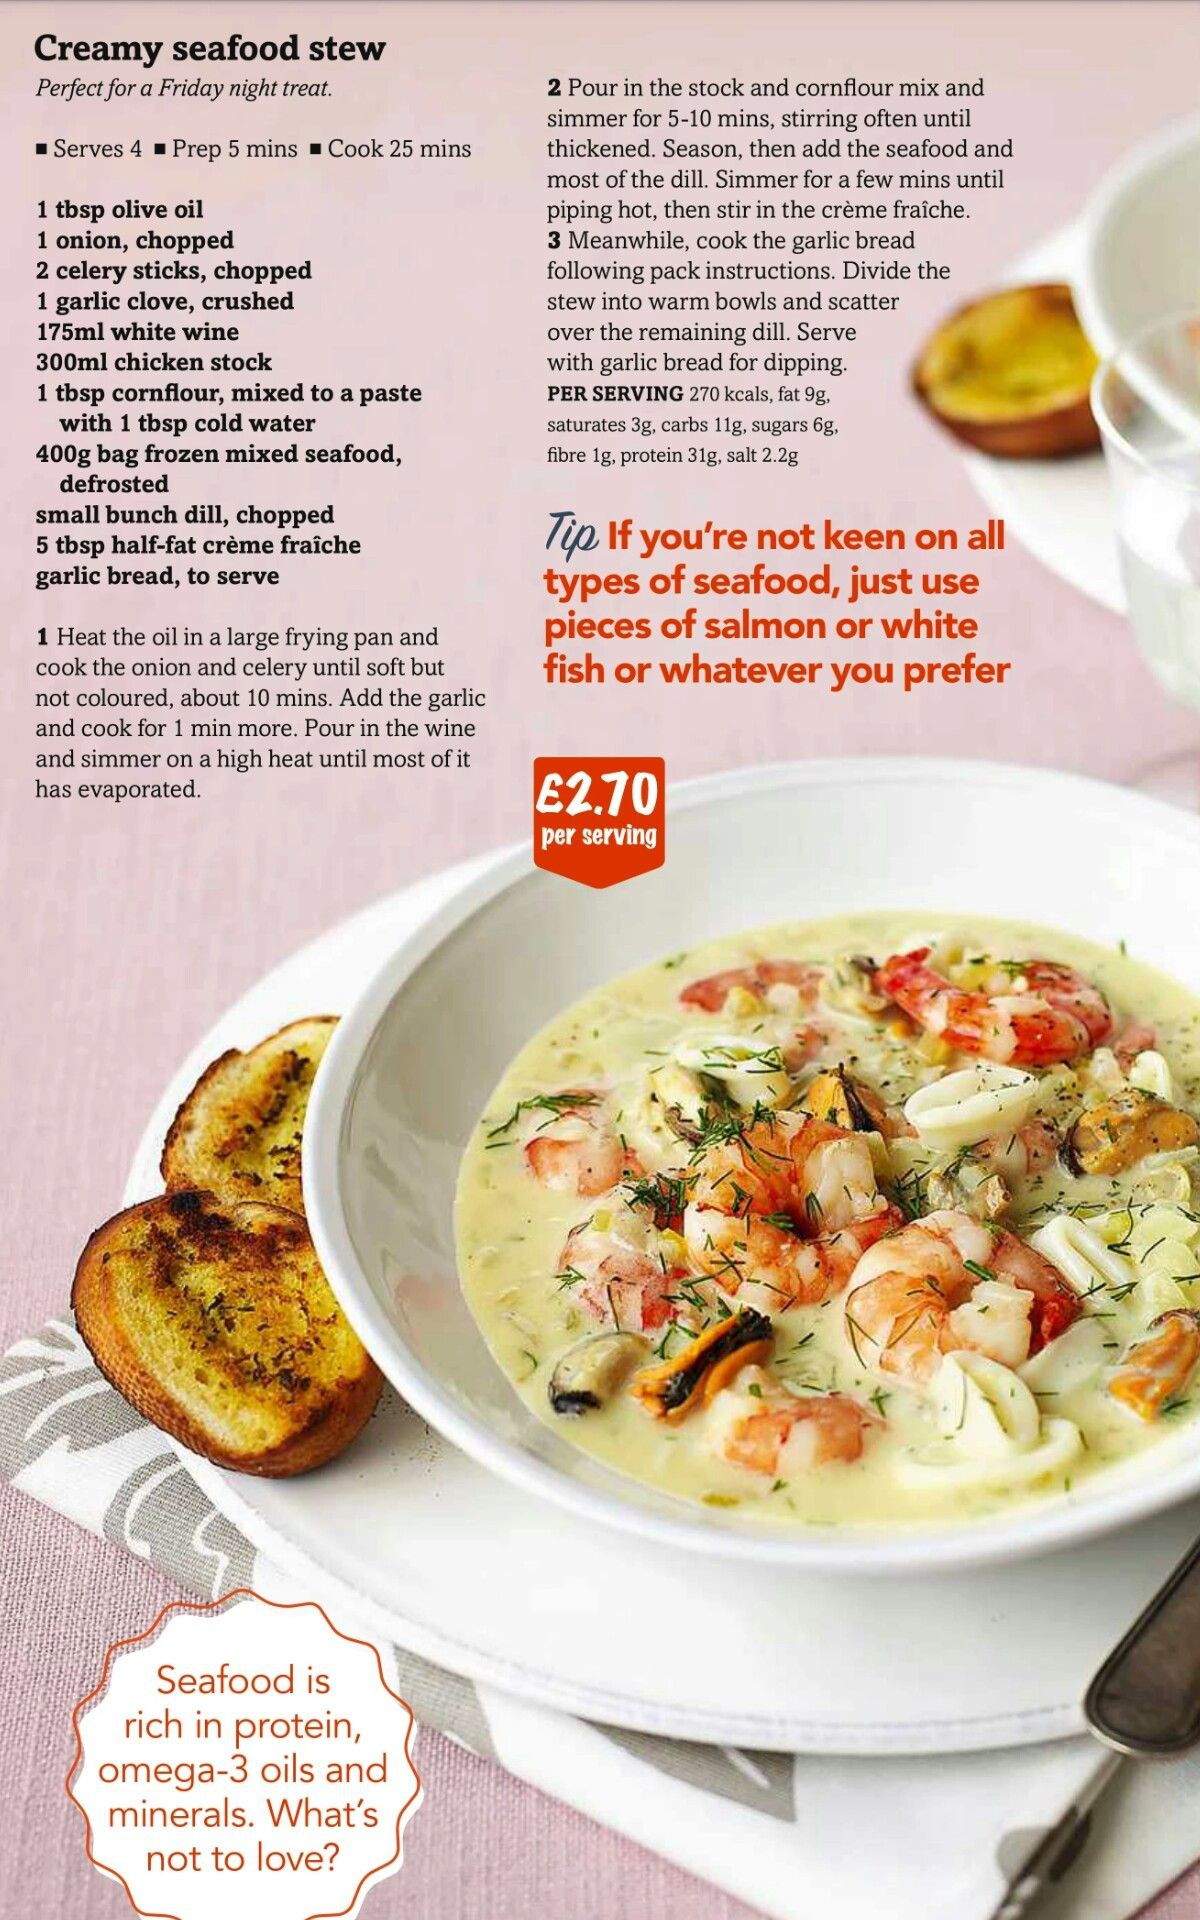 Creamy Fish Stew
 Creamy seafood stew With images